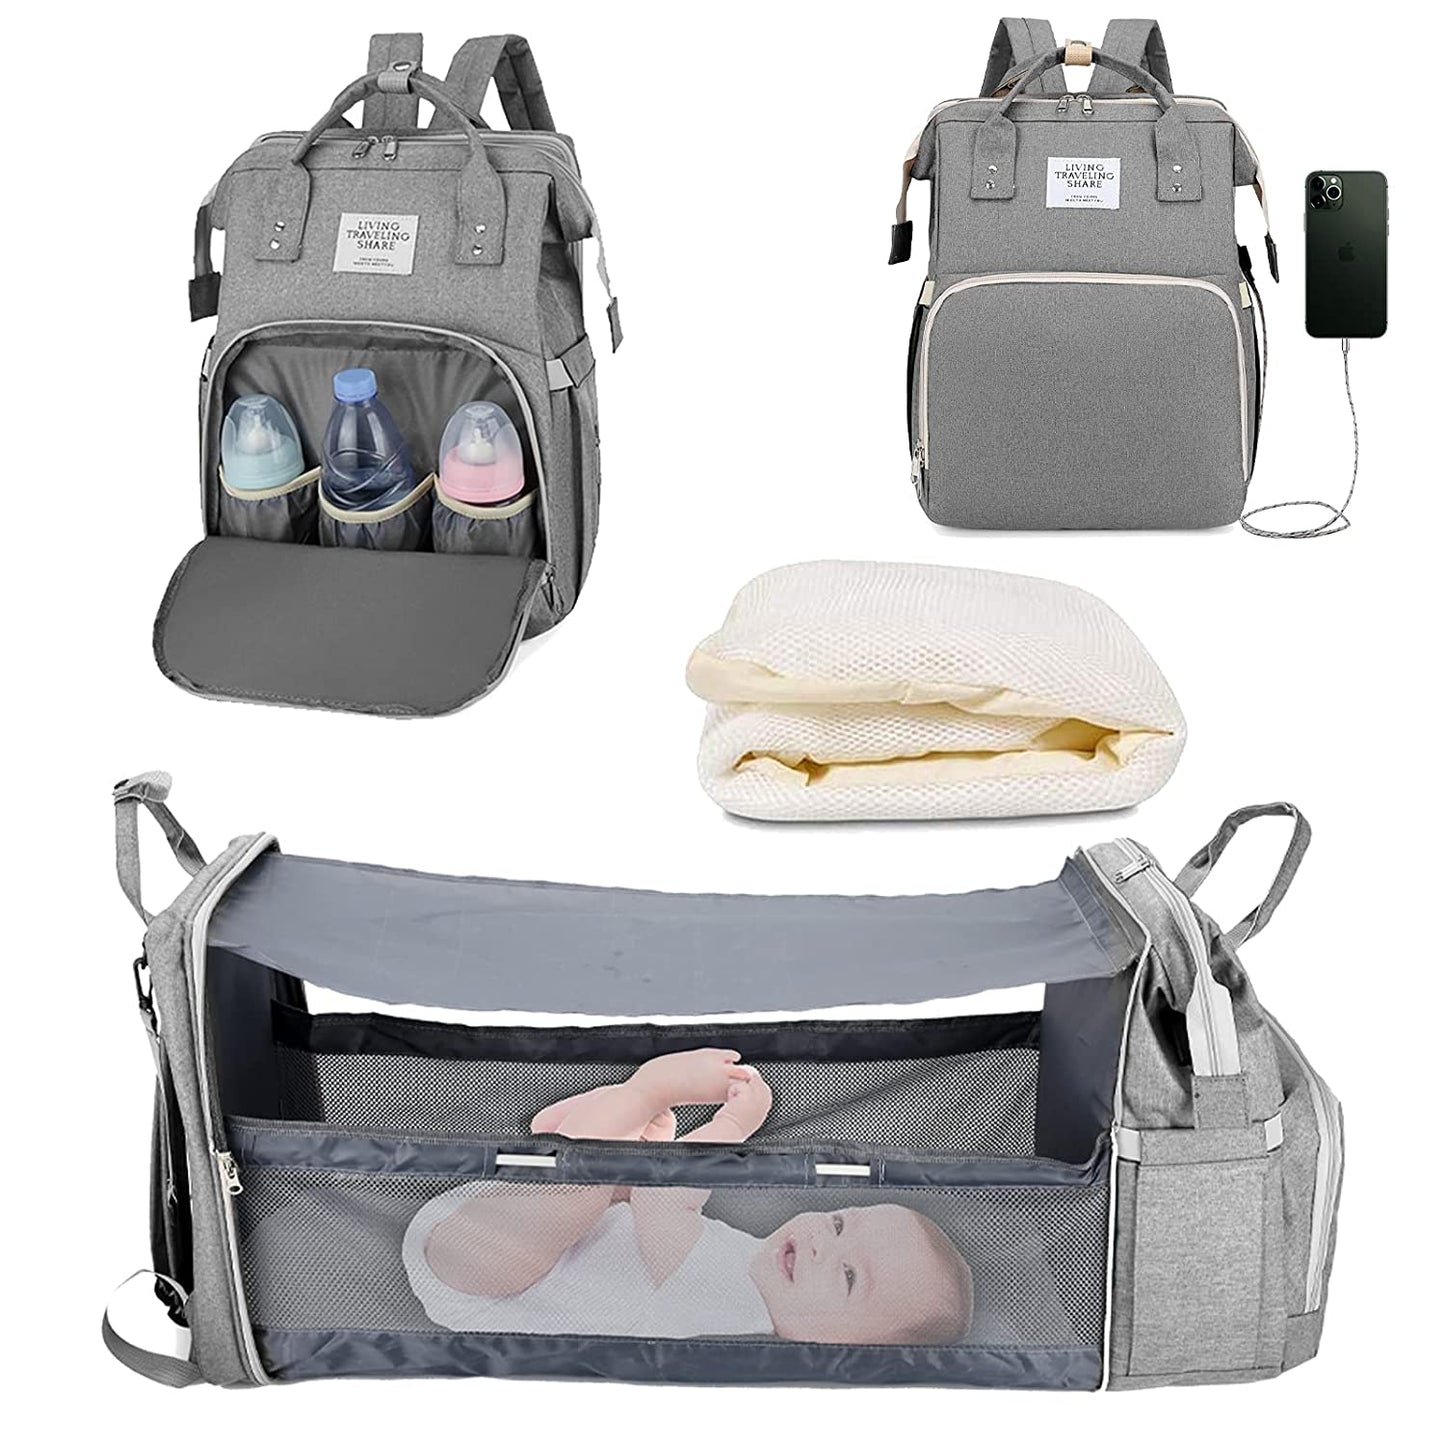 Ultimate Mommy Bag: 3-in-1 Portable Baby Bed, Changing Pad, and Diaper Bag